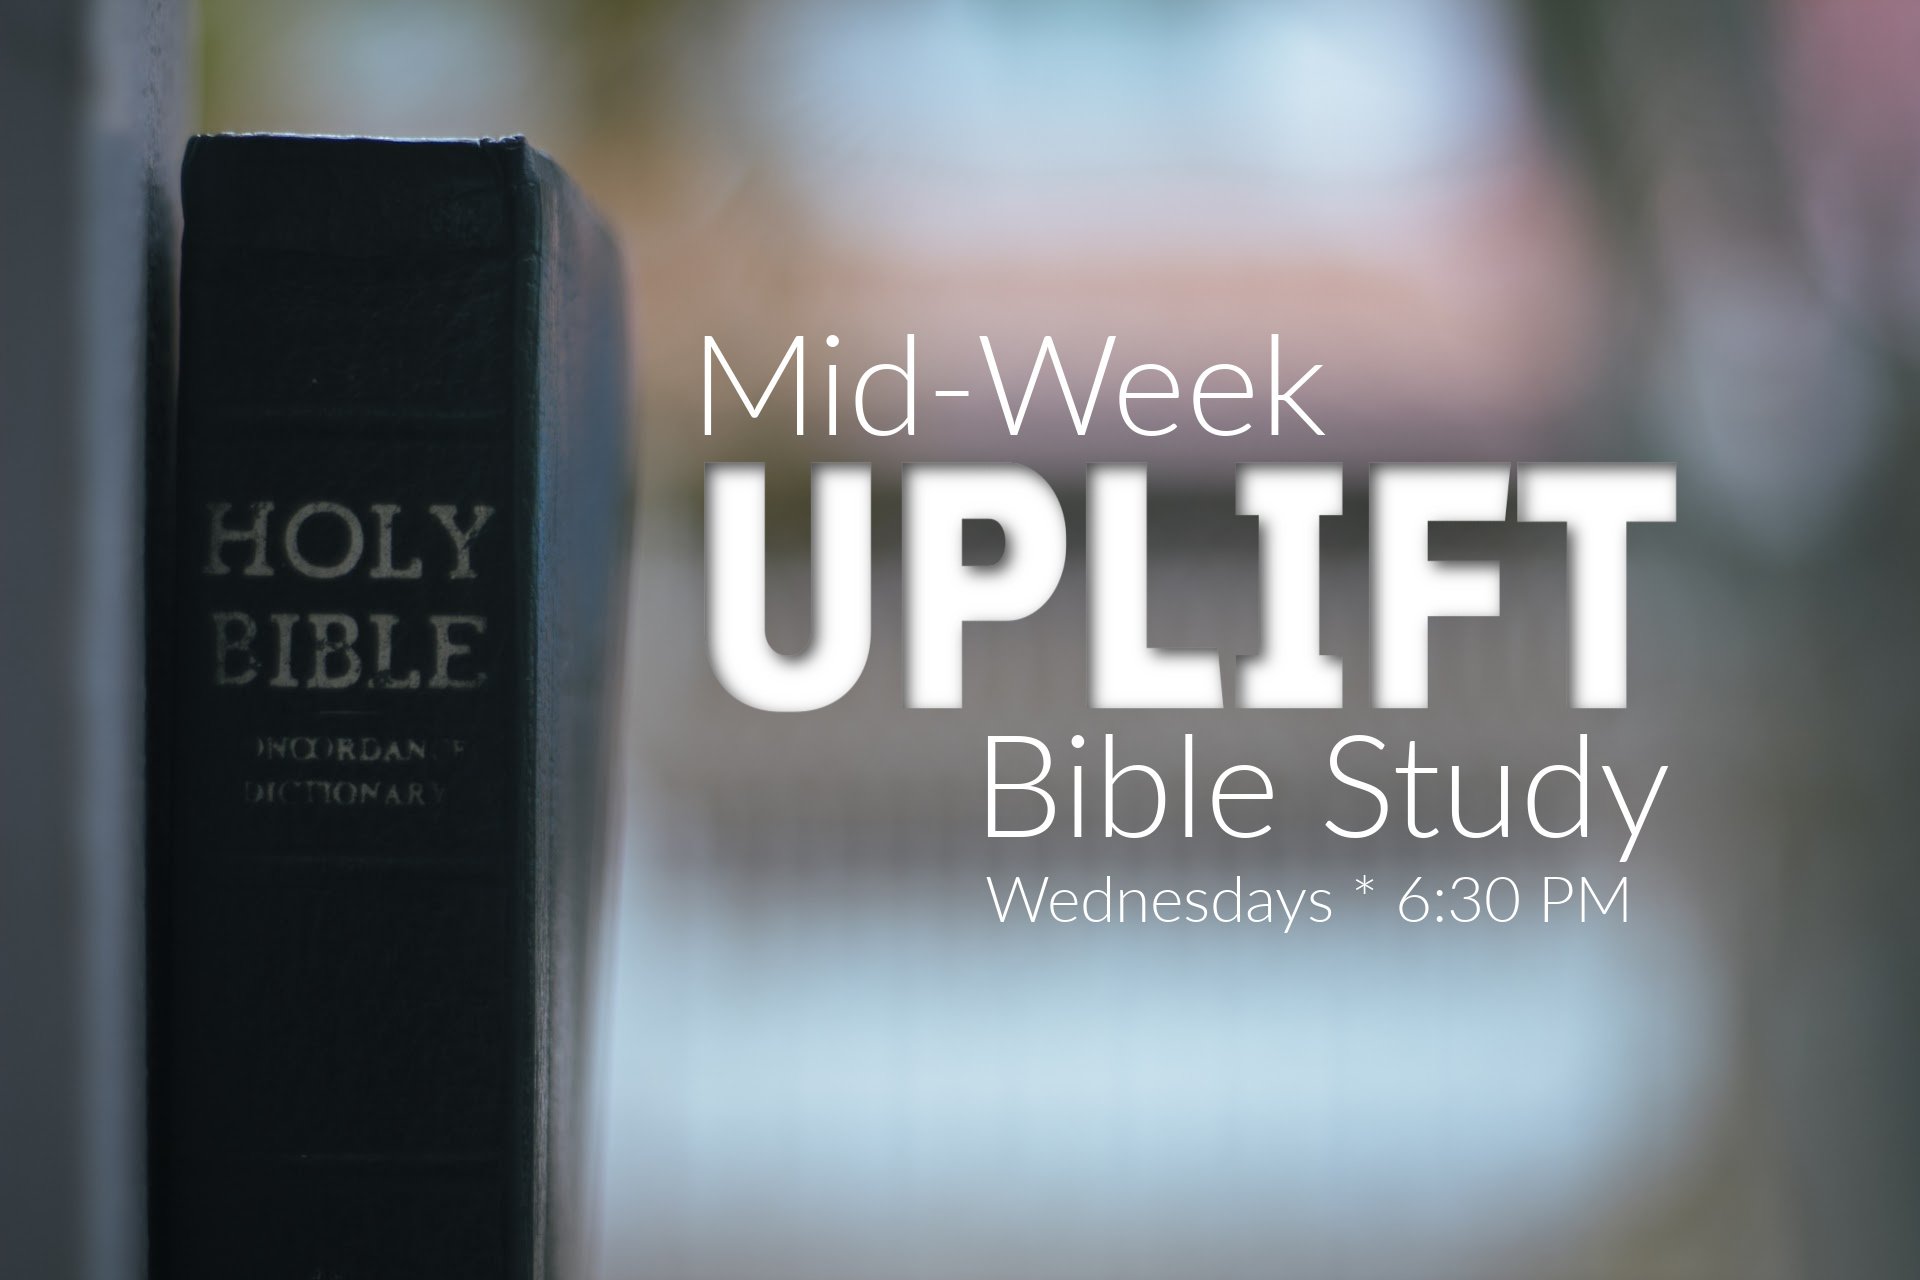 Adult Bible Study Opportunity